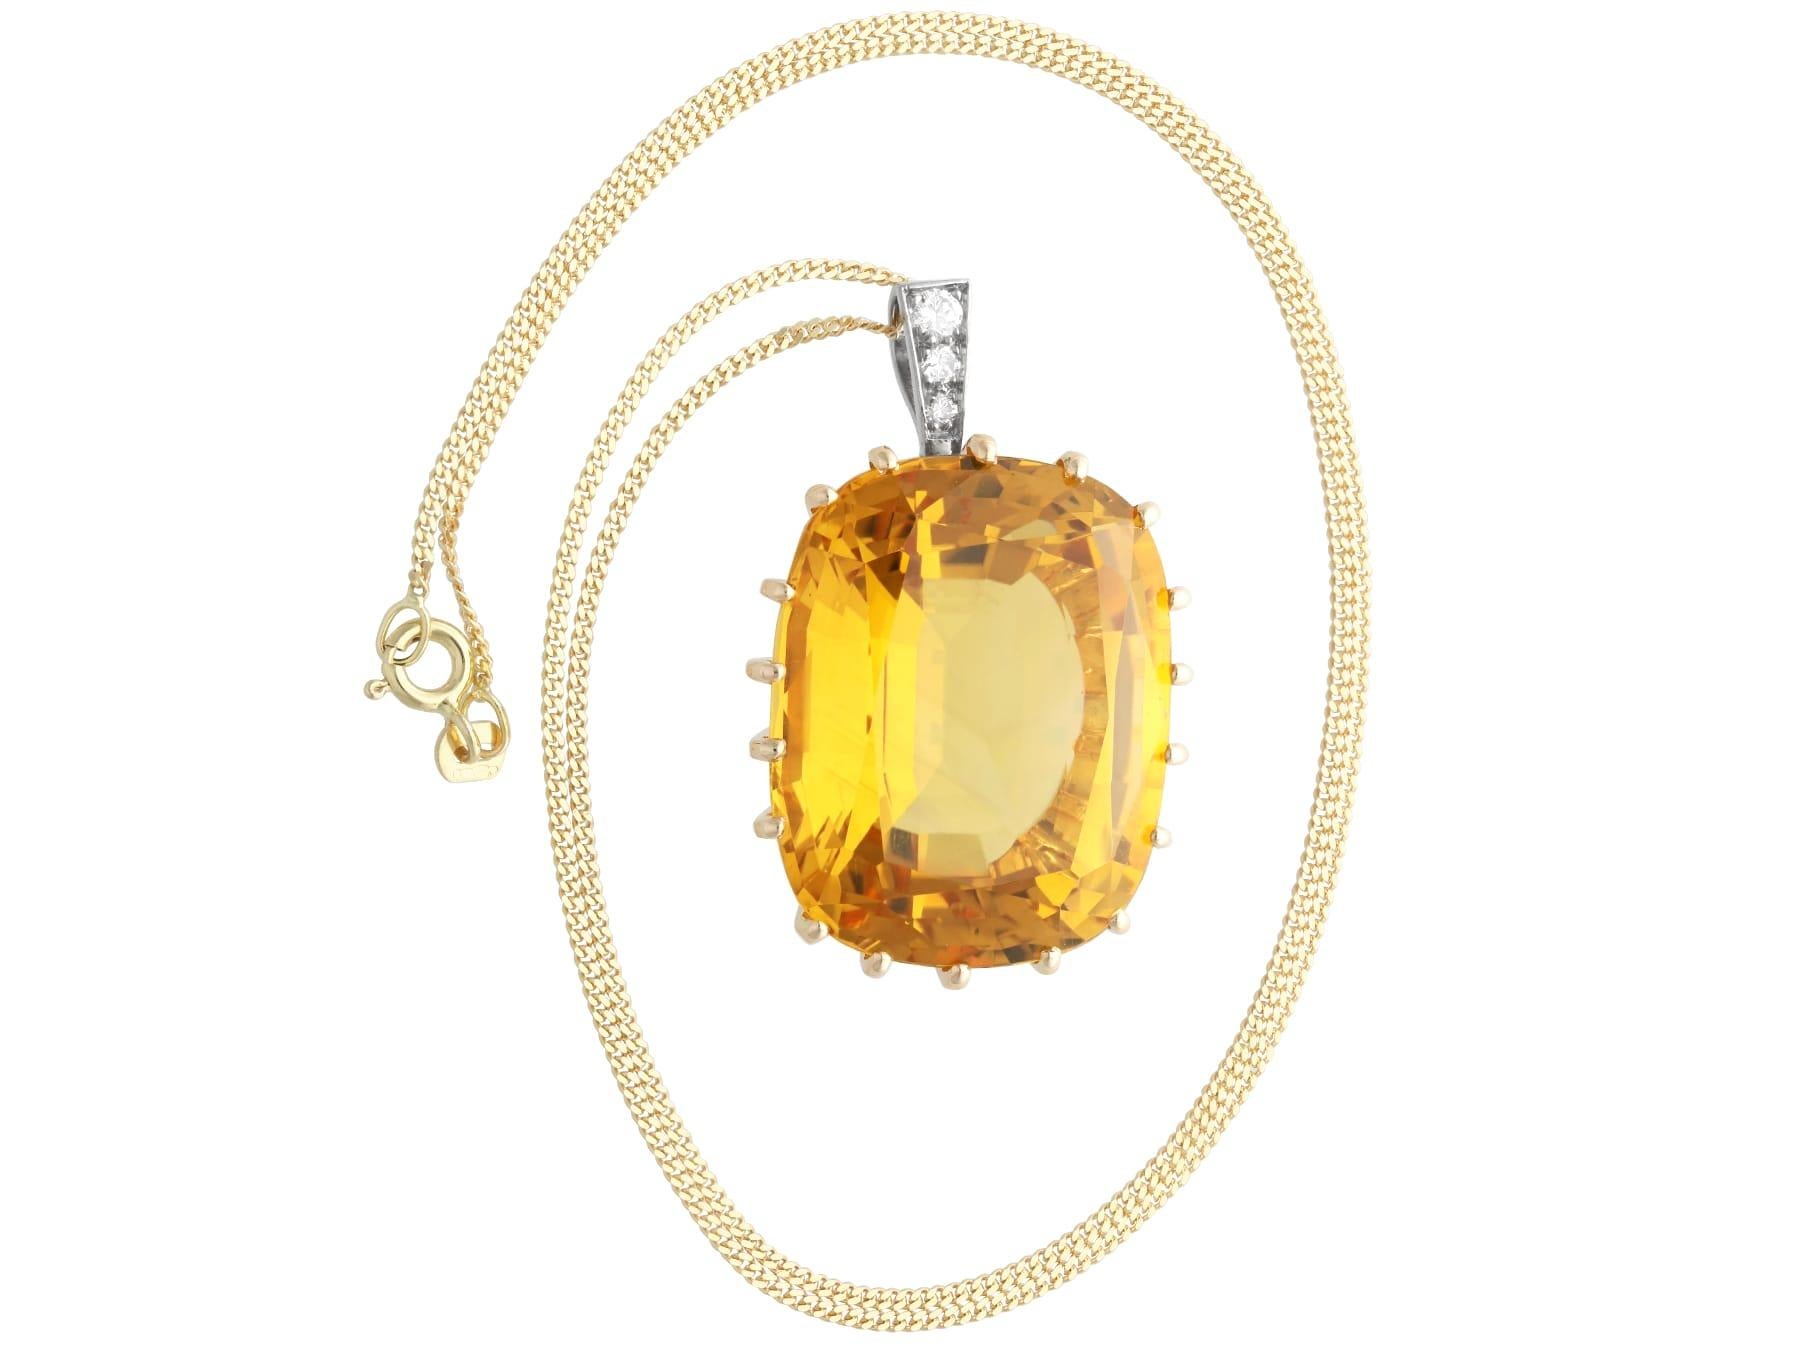 Cushion Cut Vintage French 64.39 Carat Citrine and Yellow Gold Pendant